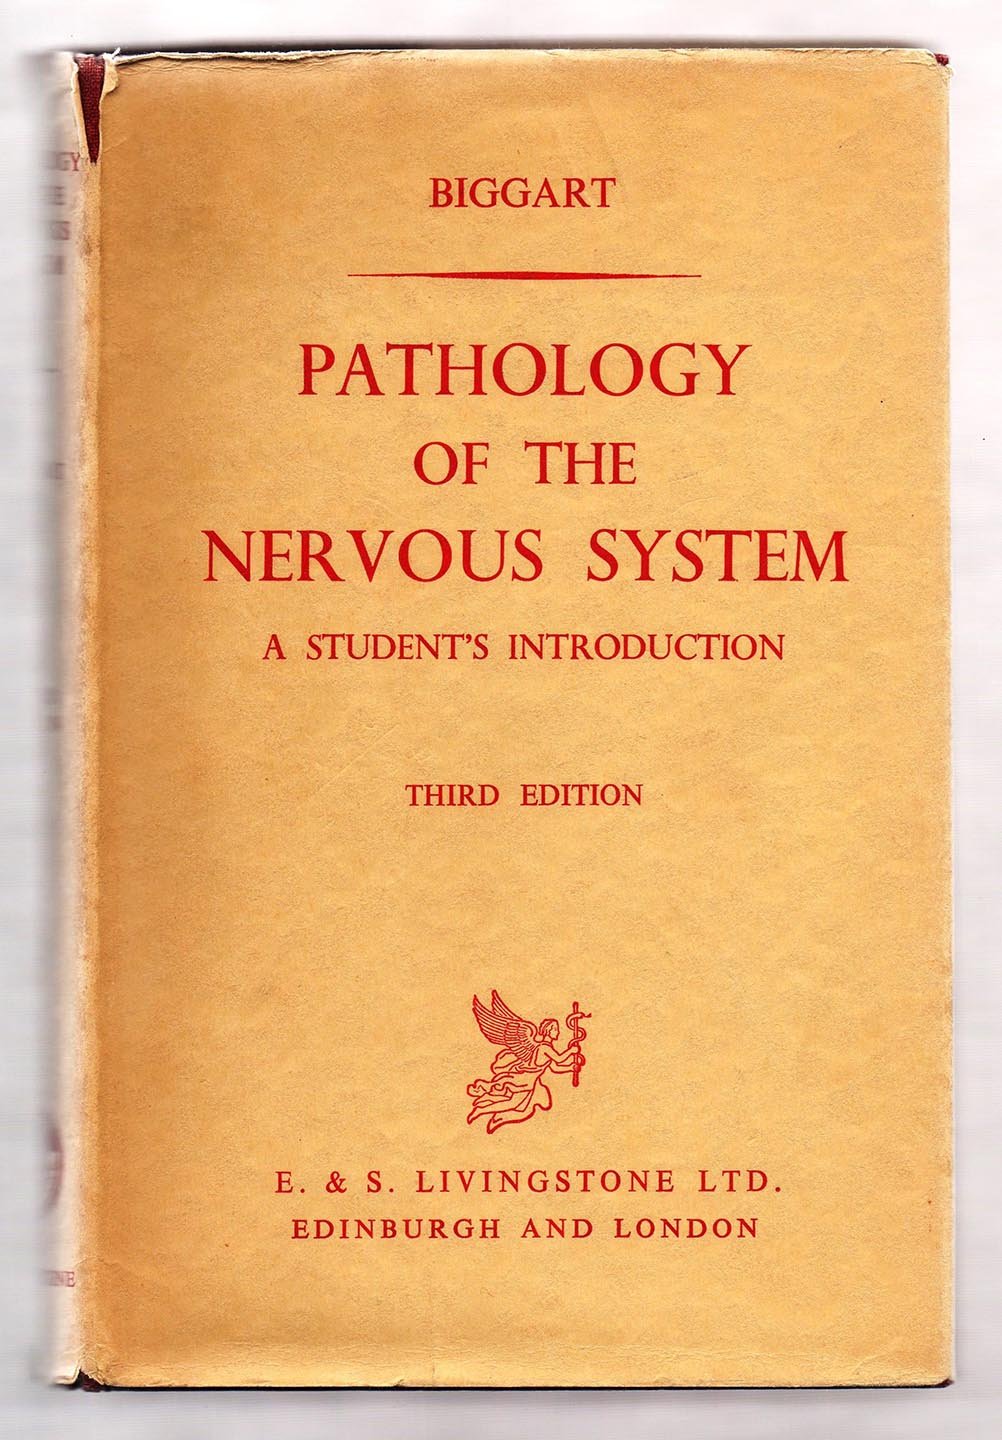 Pathology of the Nervous System: A Student's Introduction